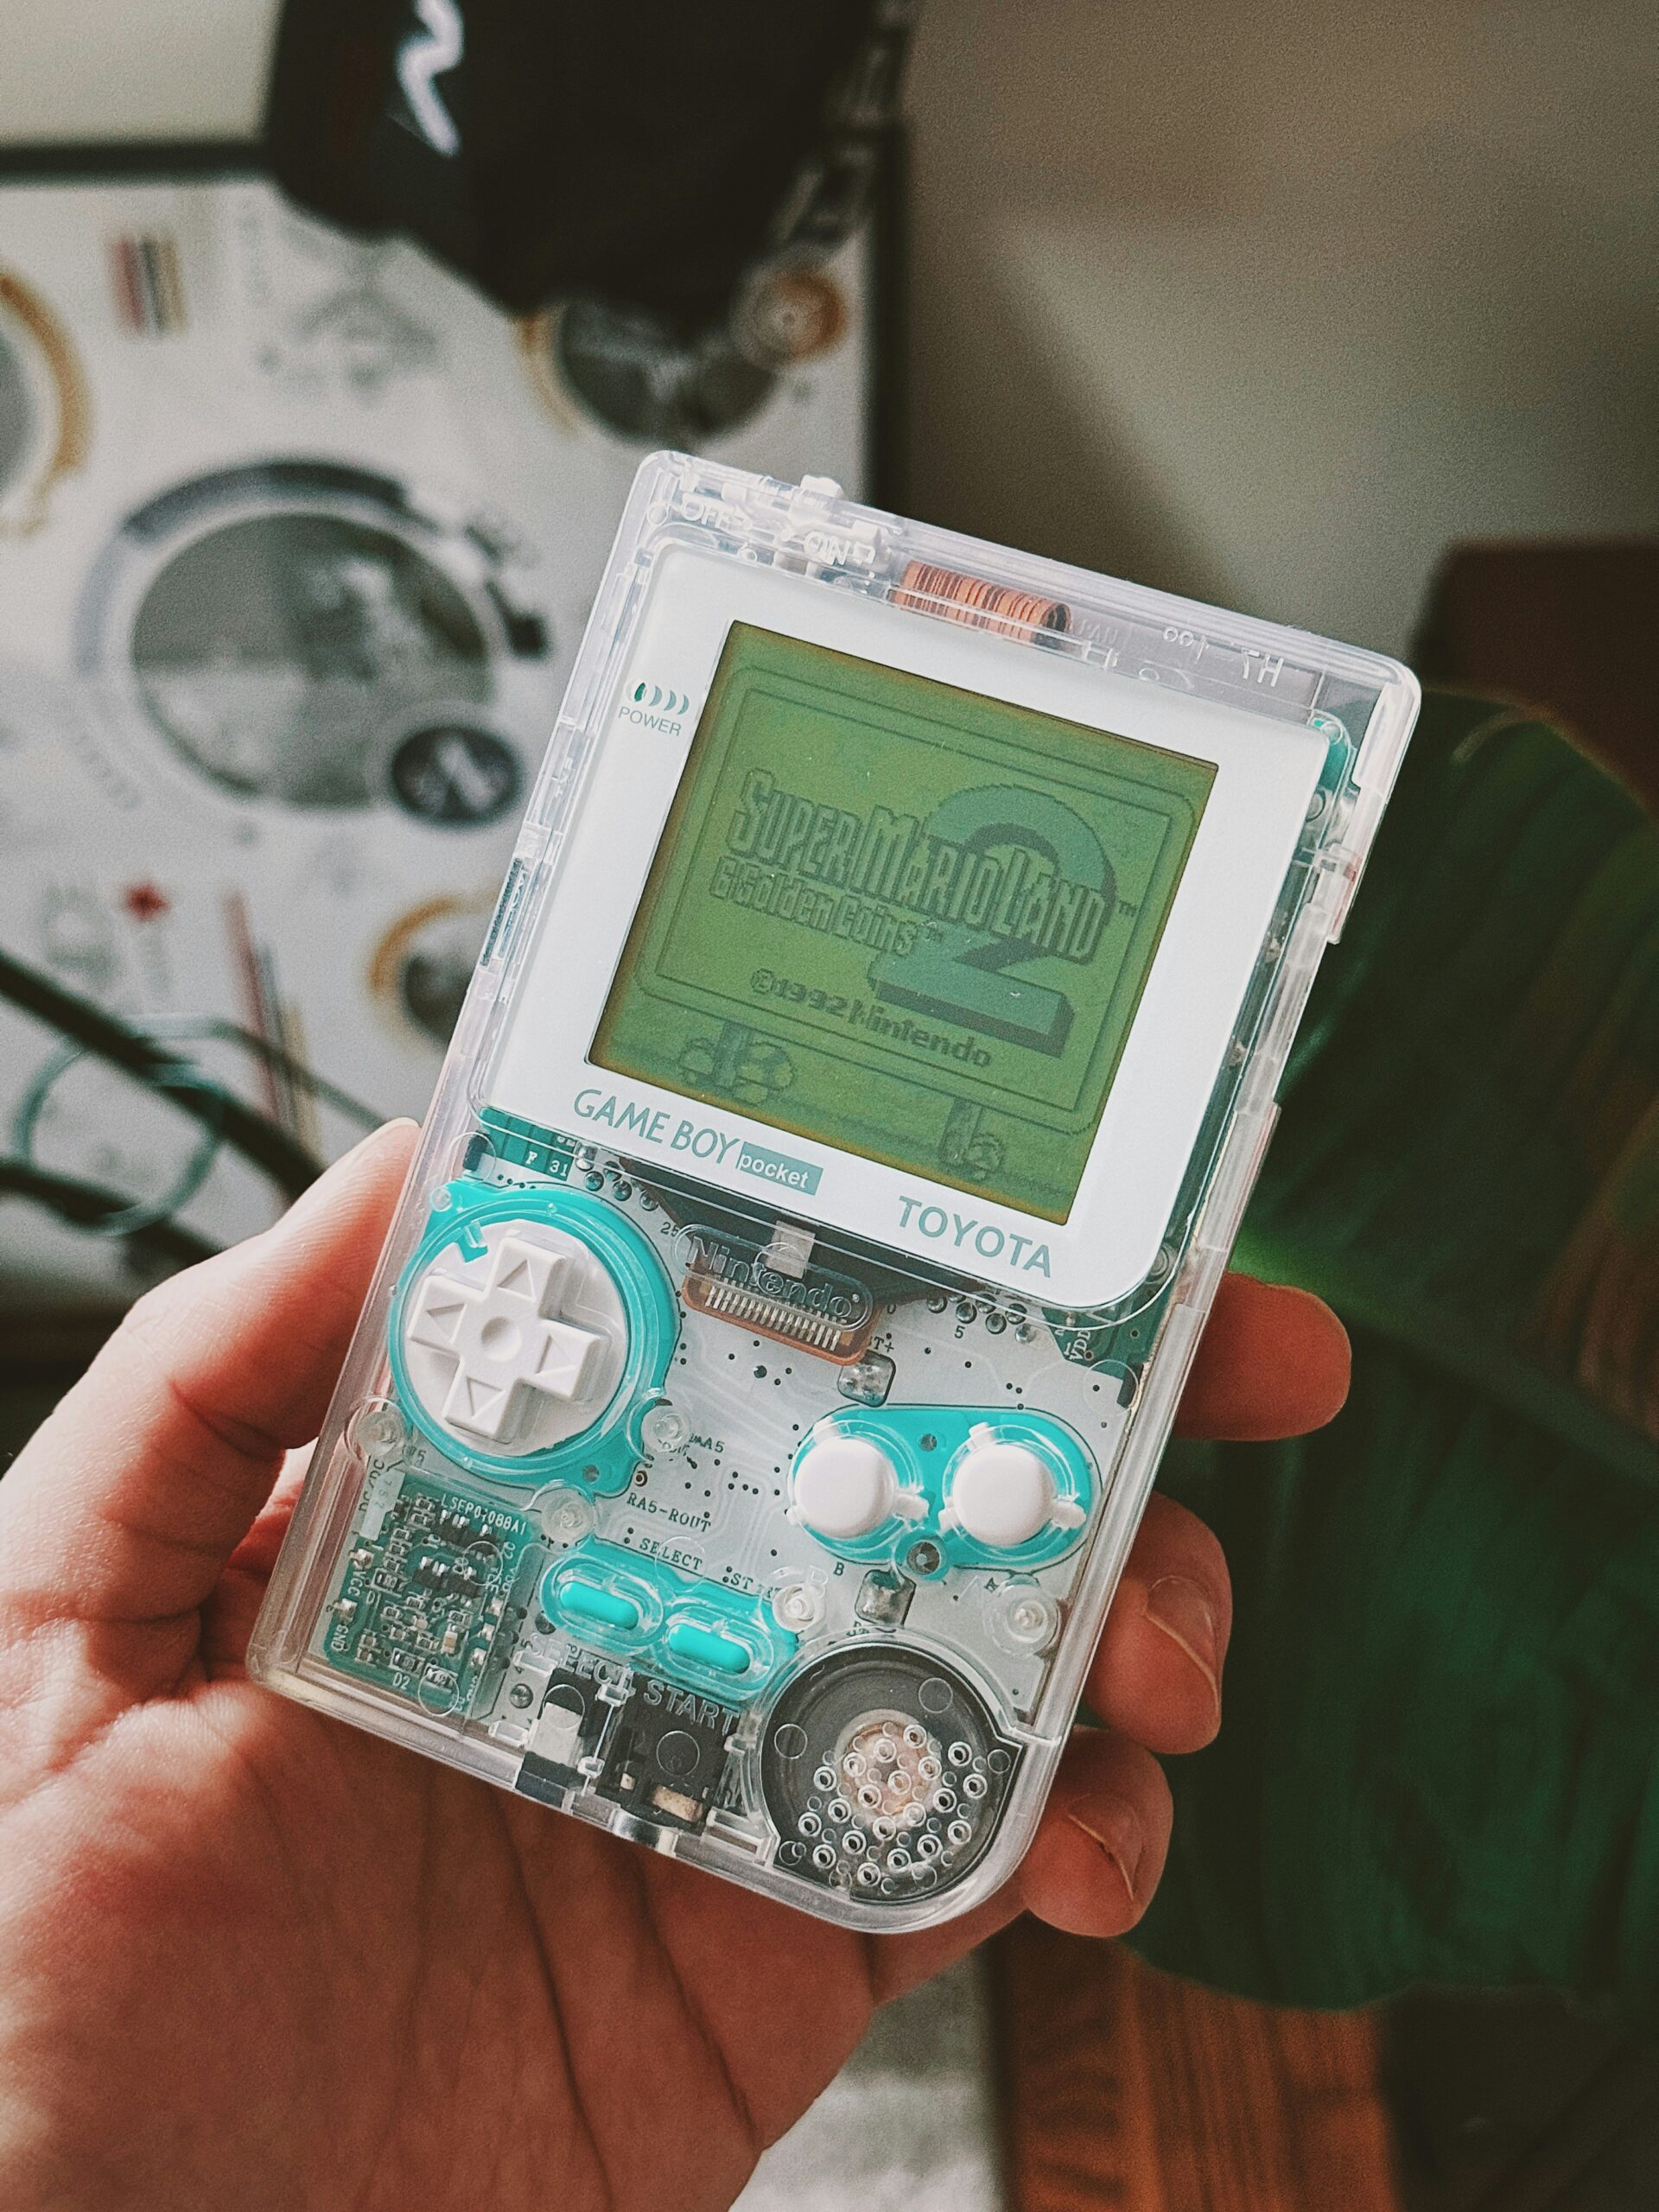 Nintendo Gameboy Advance: The Most Underrated Games